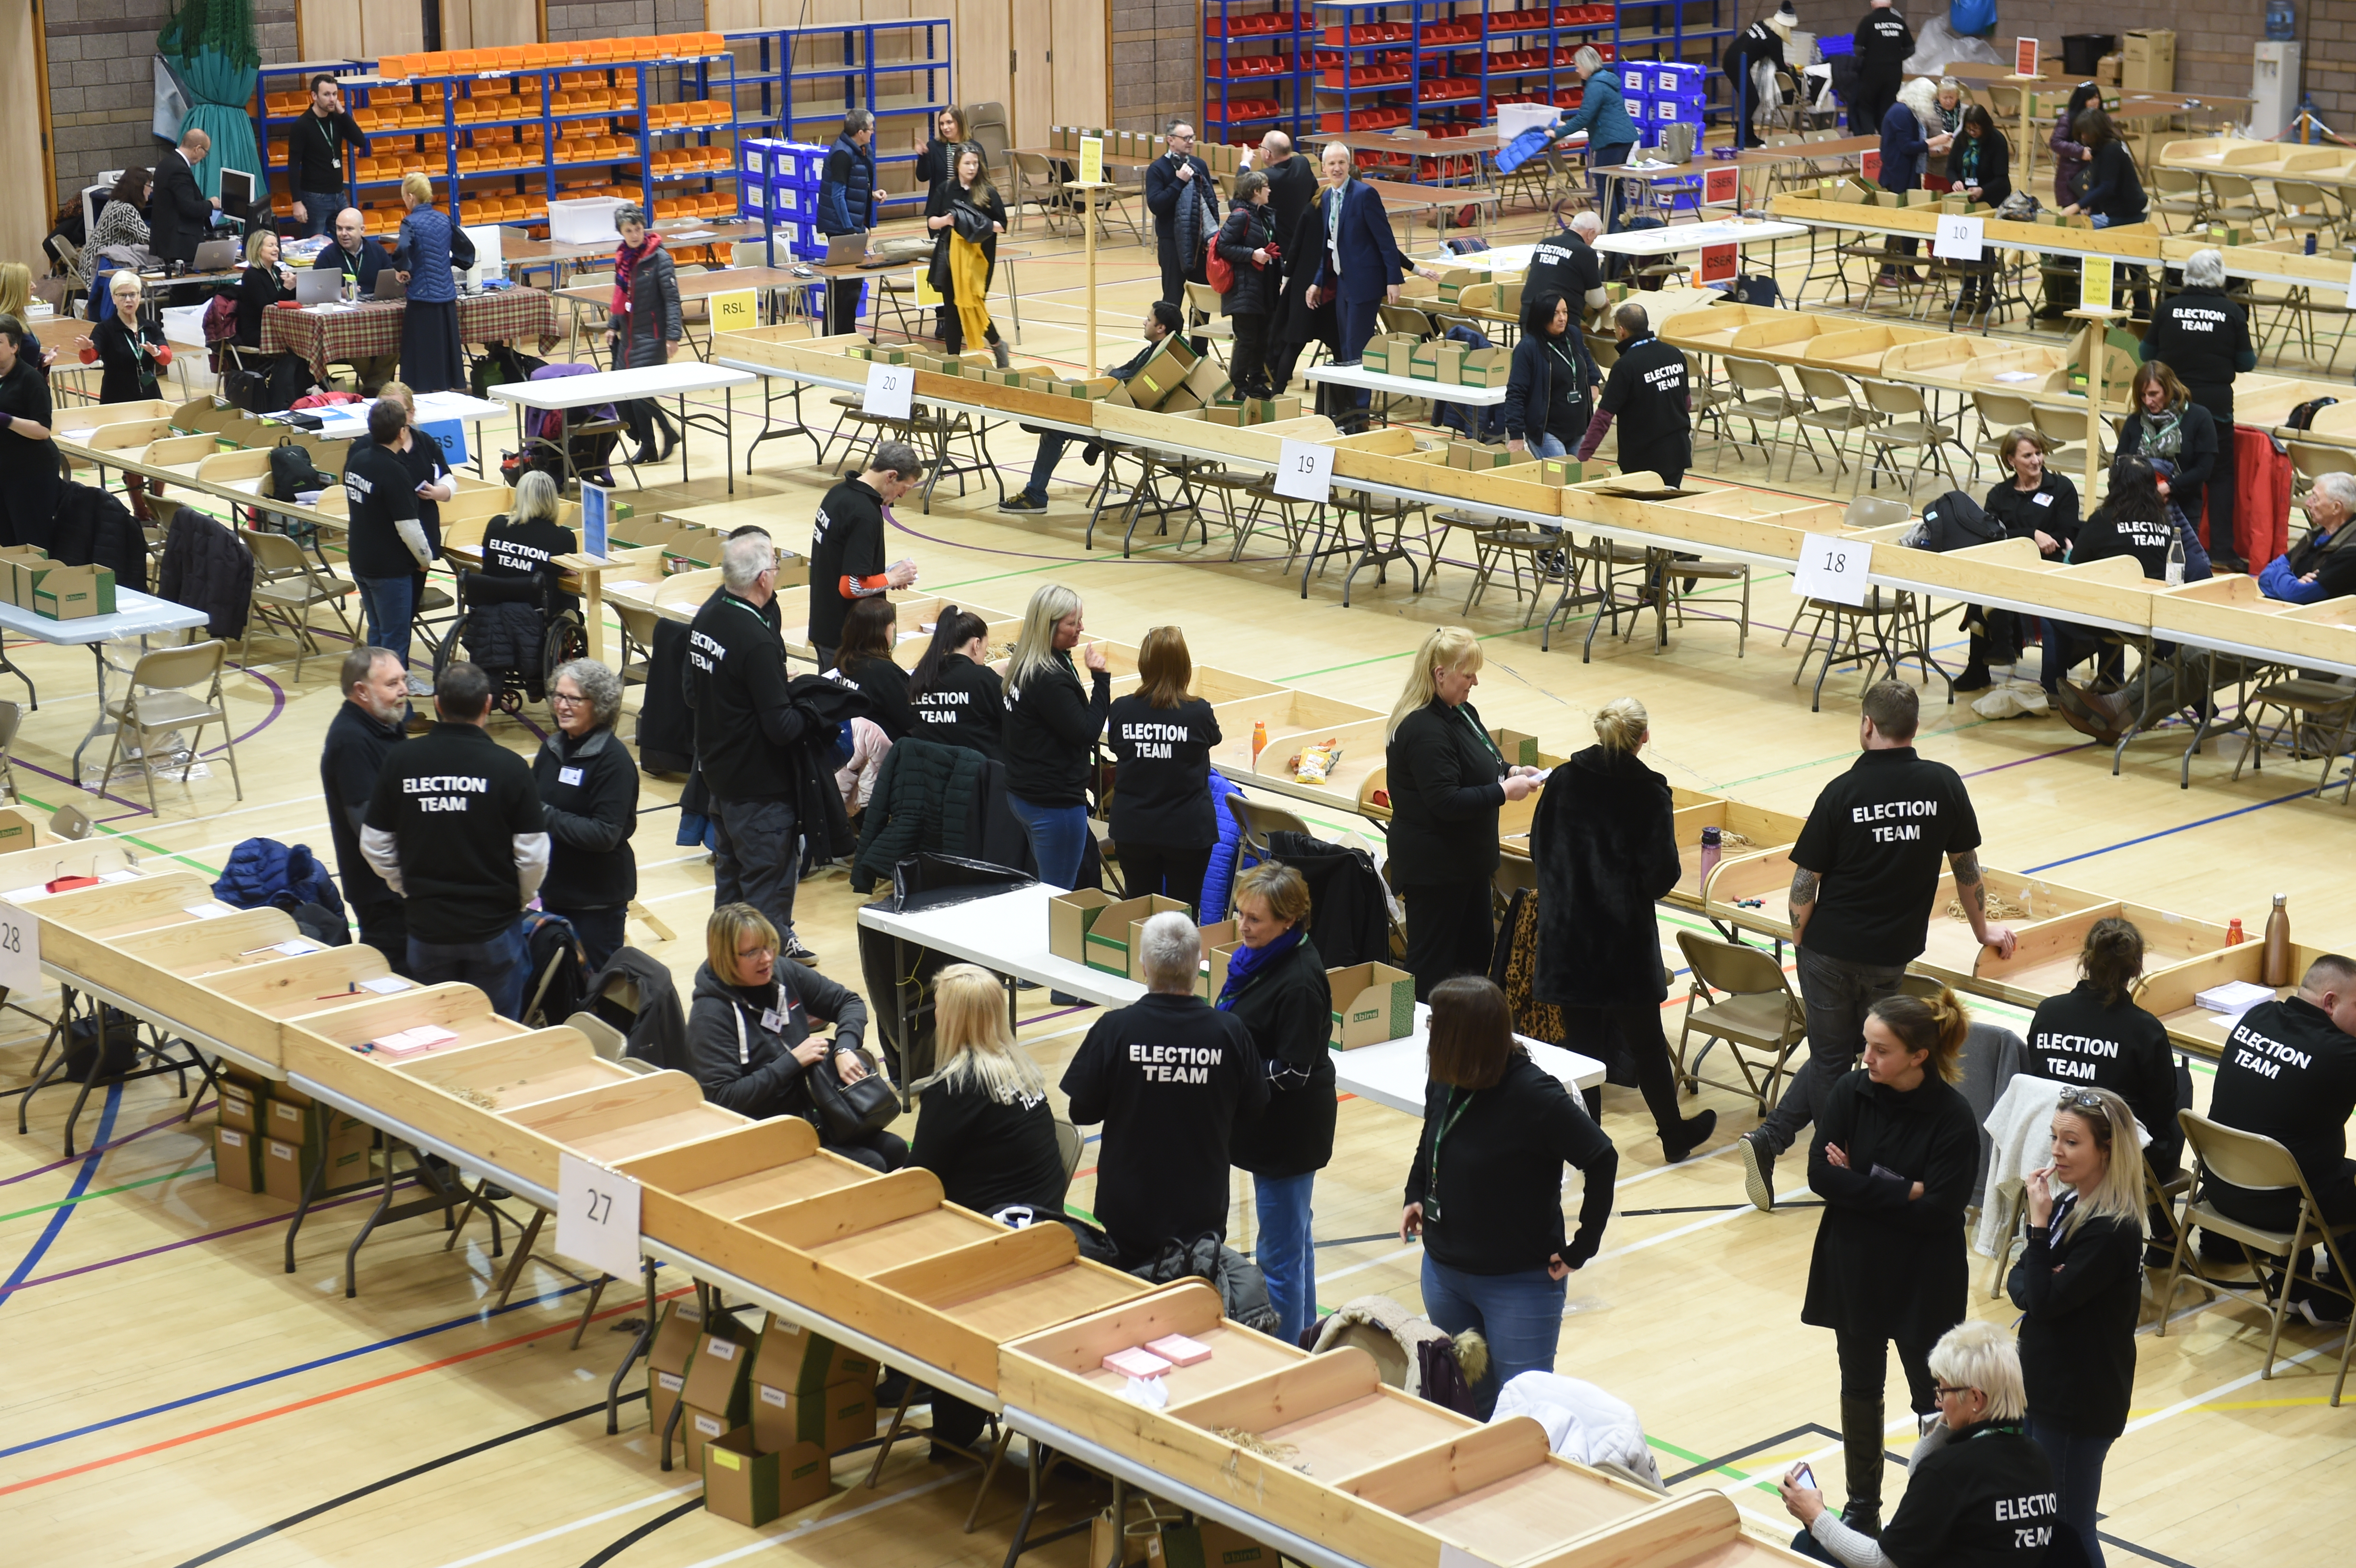 The election count under way in Inverness.